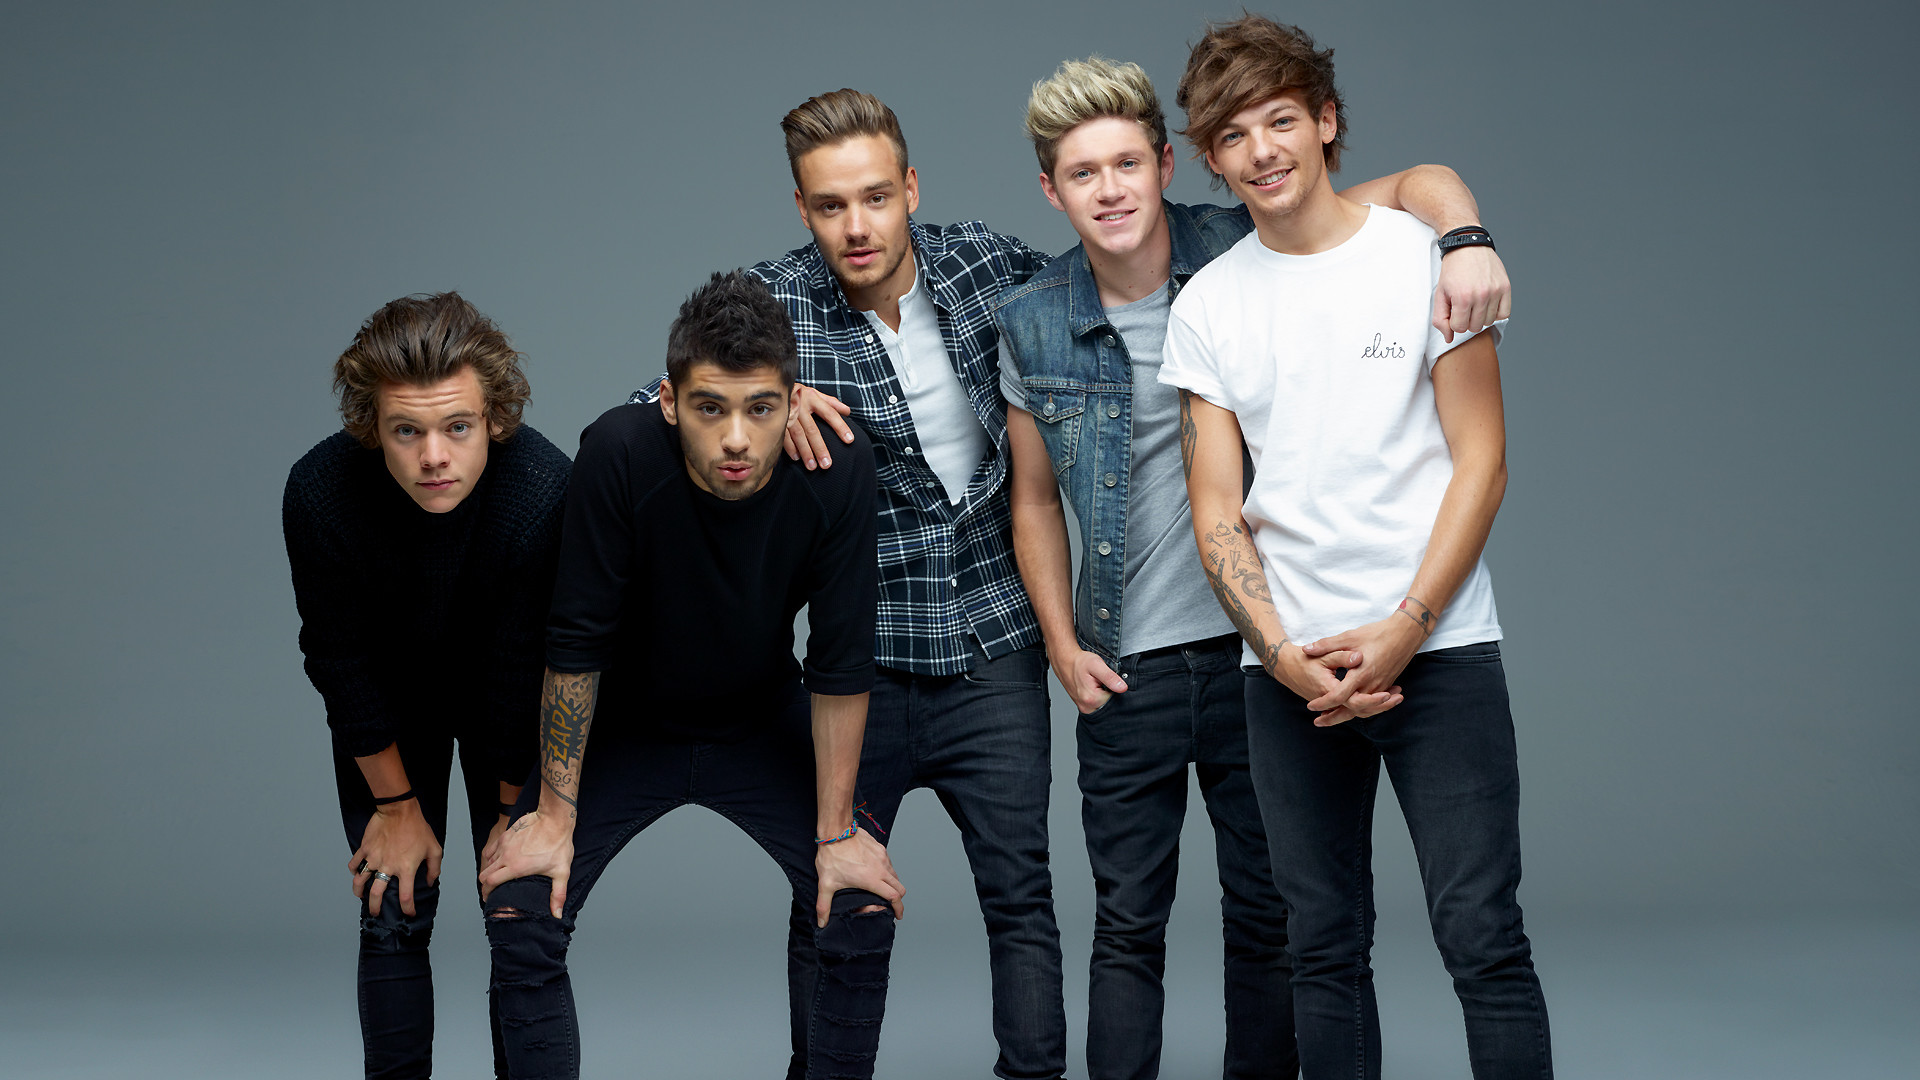 1920x1080 One Direction Wallpapers HD | Wallpapers, Backgrounds, Images, Art ..